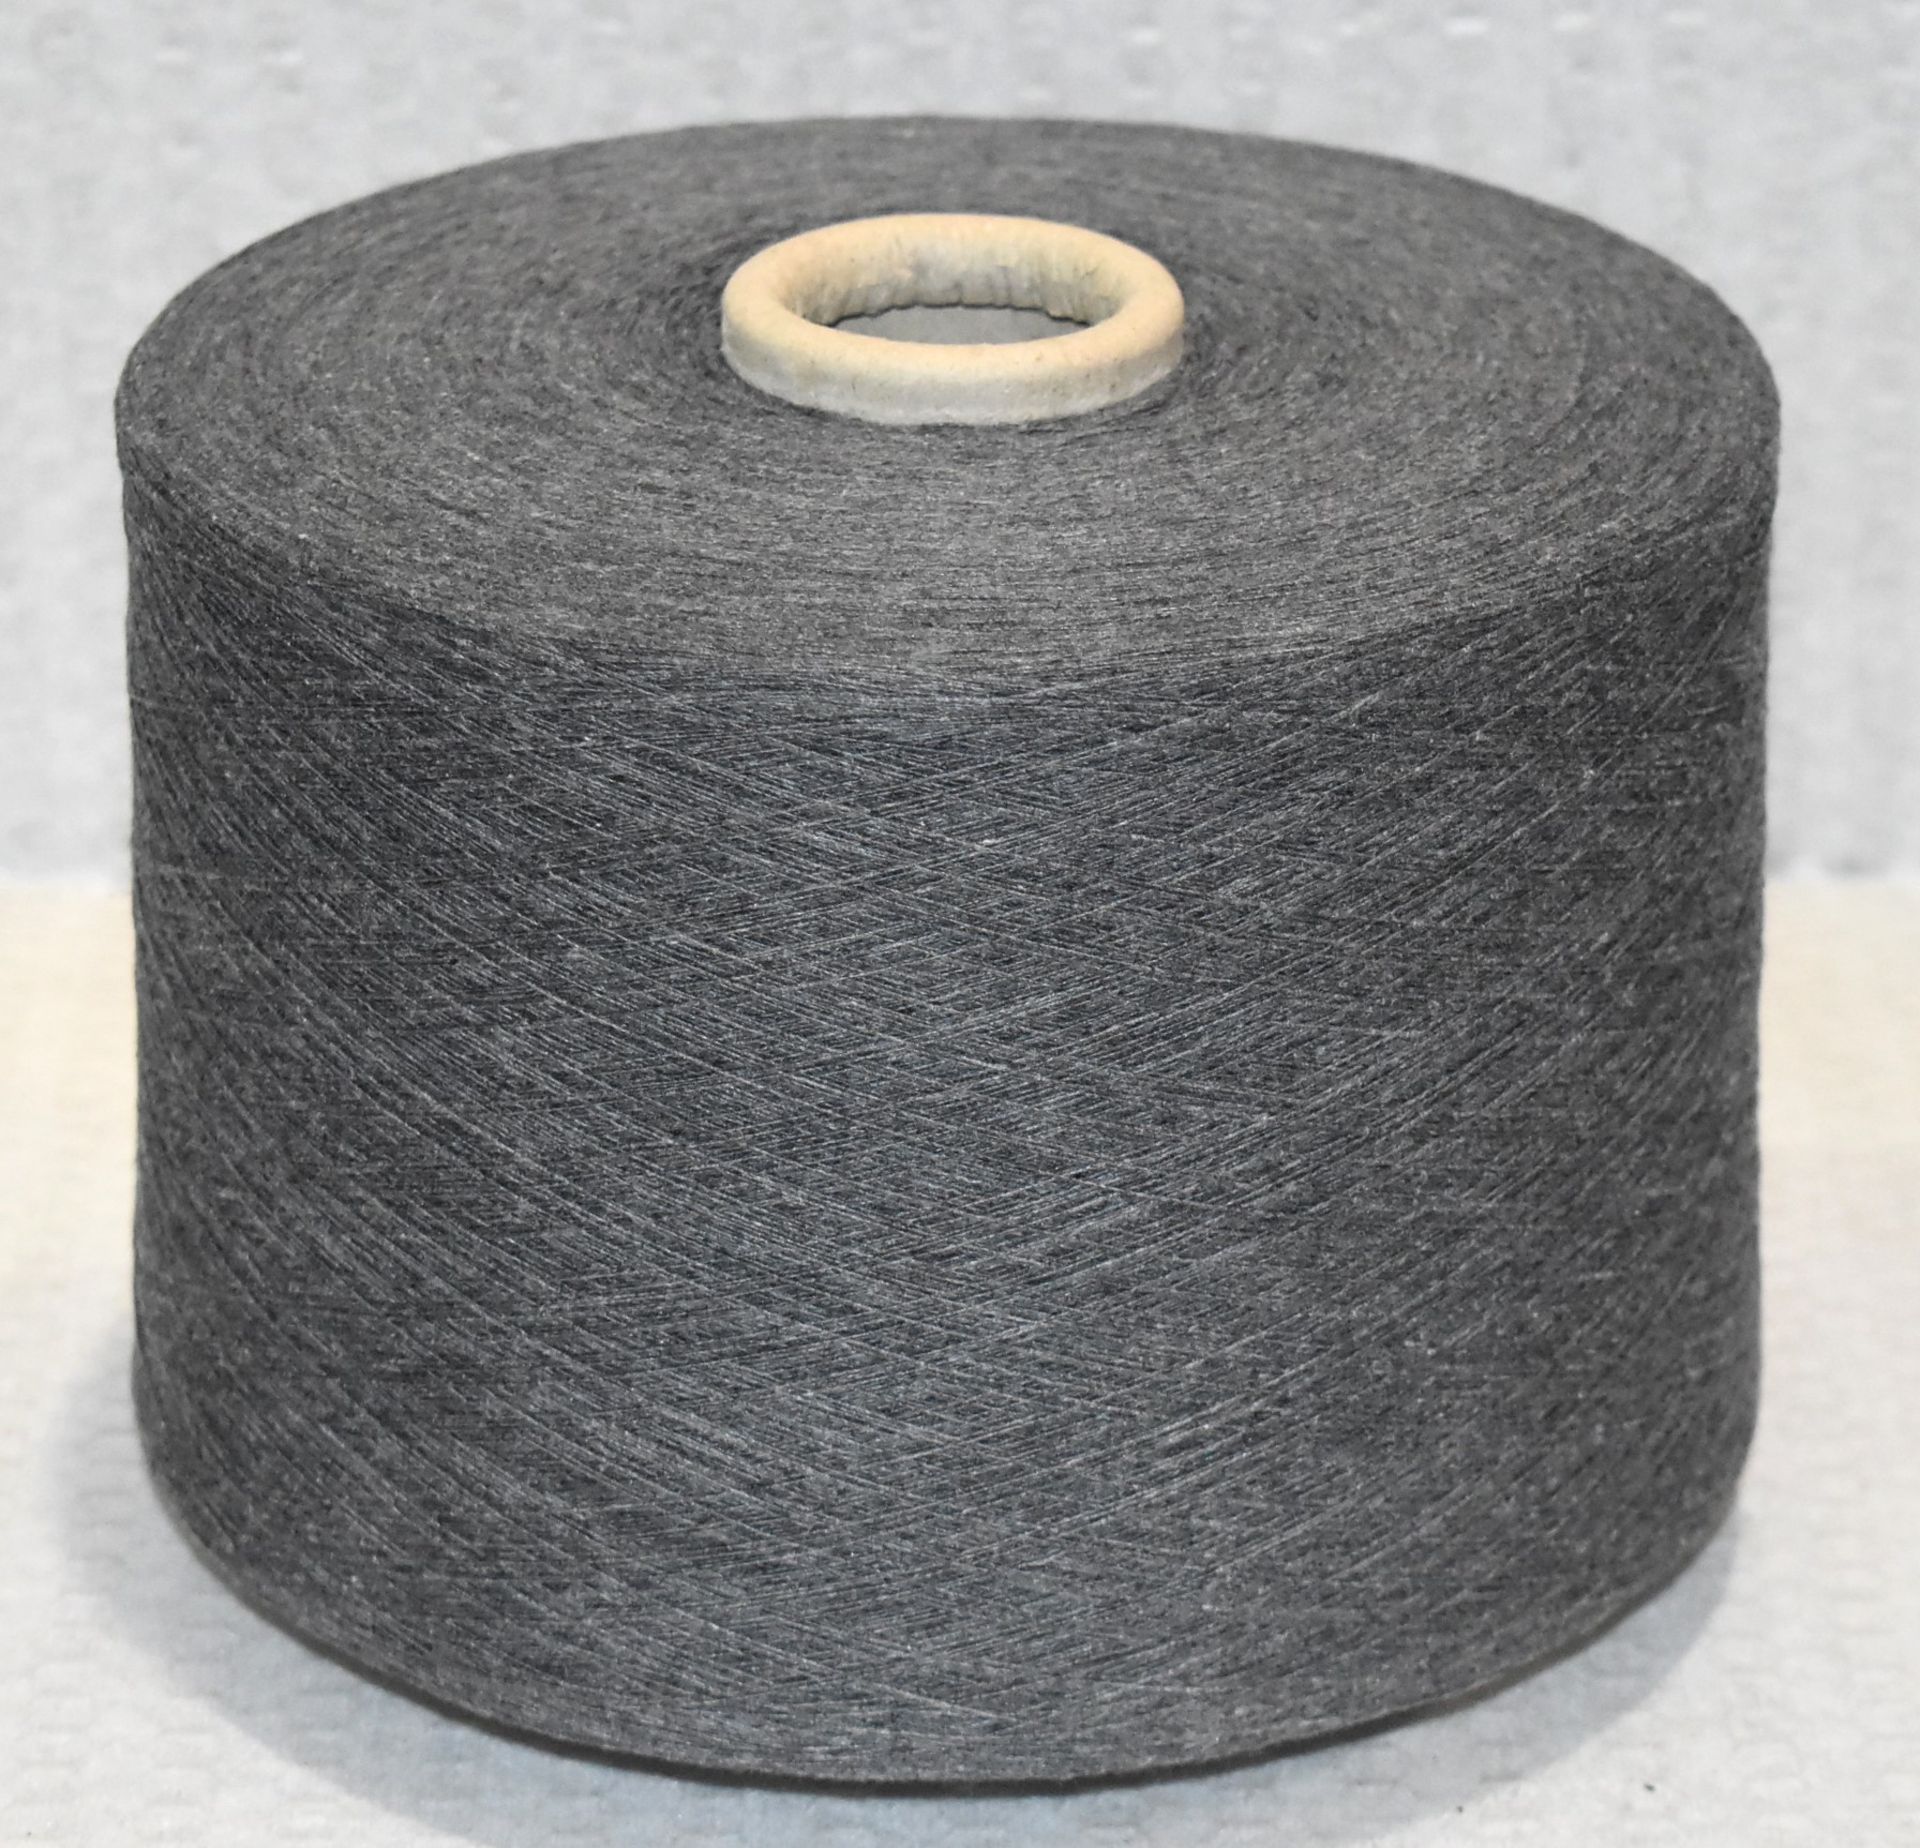 10 x Cones of 1/13 MicroCotton Knitting Yarn - Mid Grey - Approx Weight: 2,500g - New Stock ABL Yarn - Image 4 of 17